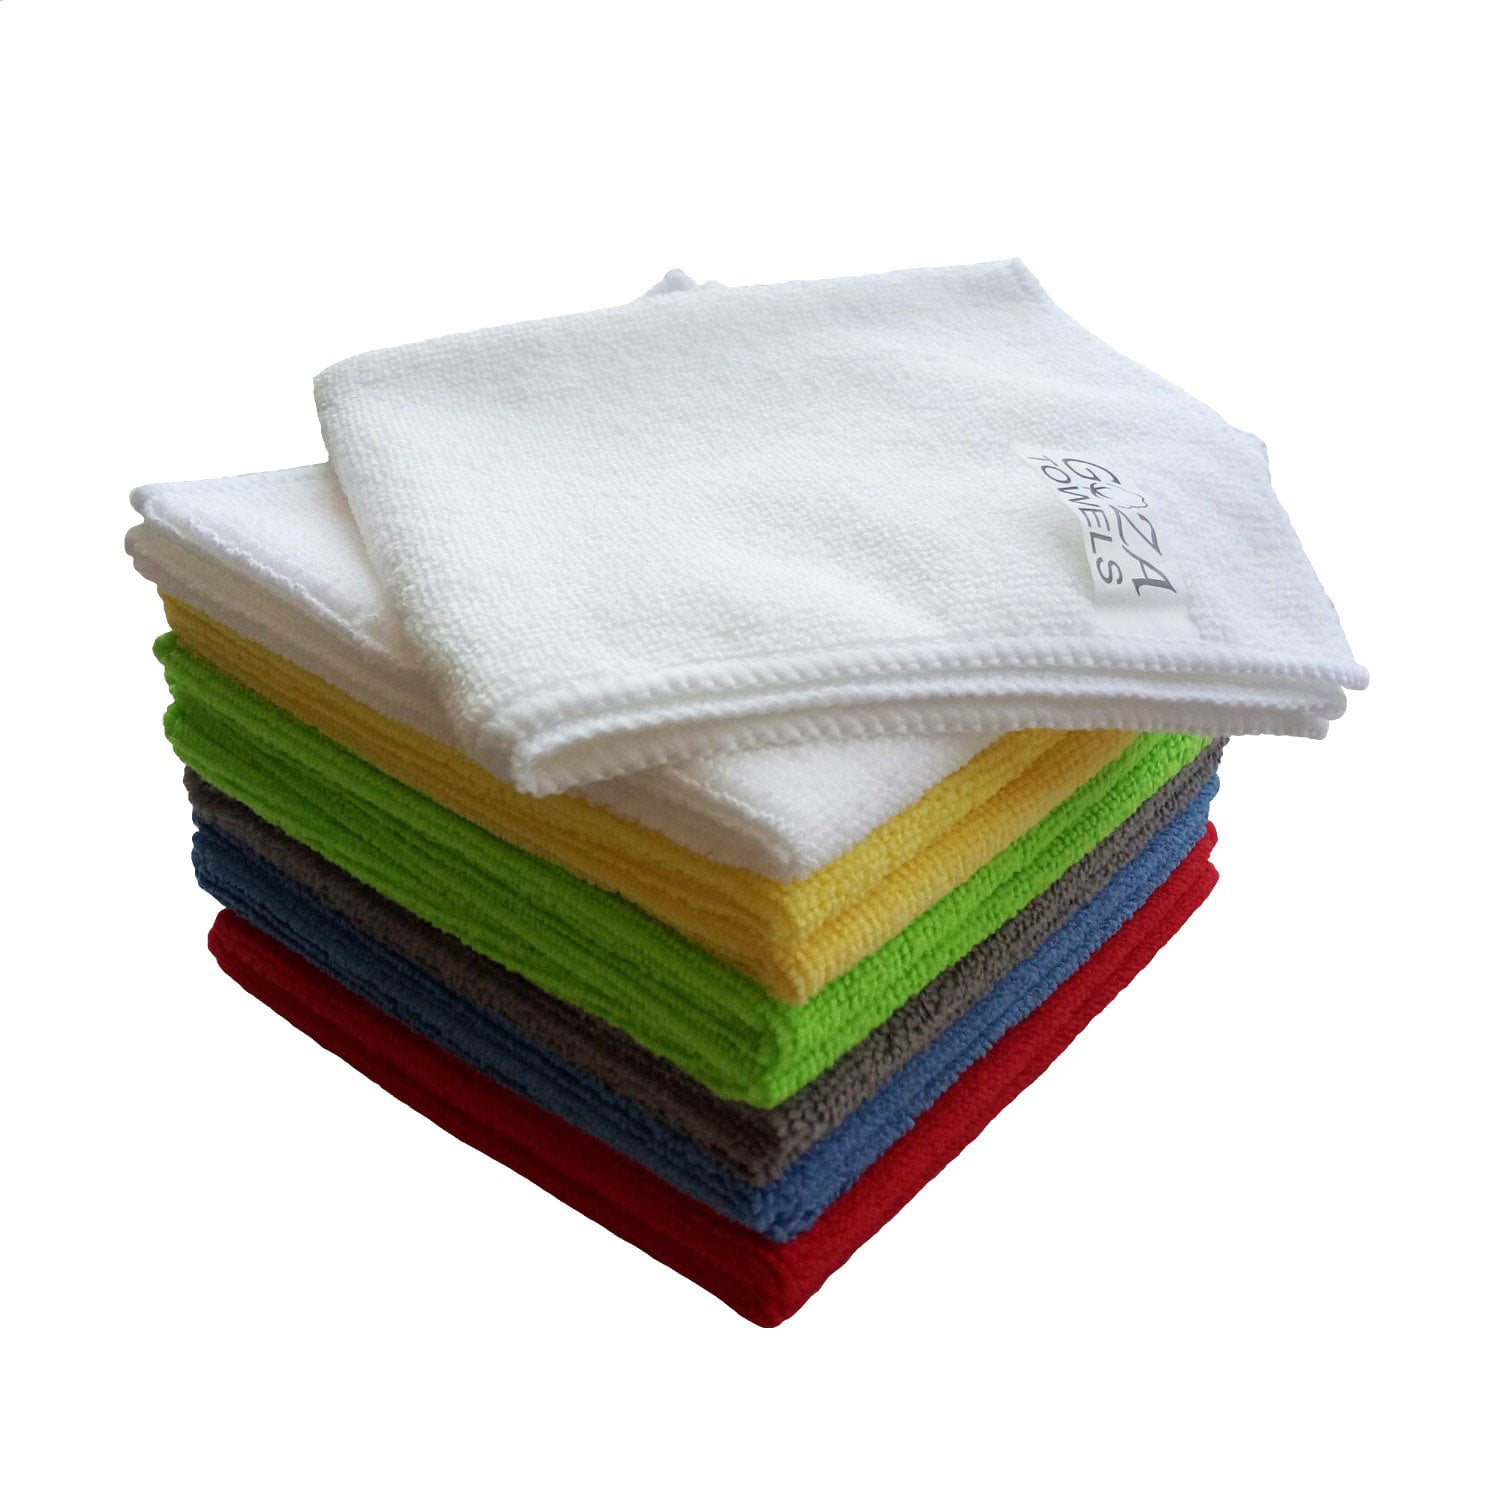 Detailer's Preference Premium Cleaning Edgeless Microfiber Towels 350gsm 16 x 16 Inches 12 Pack 